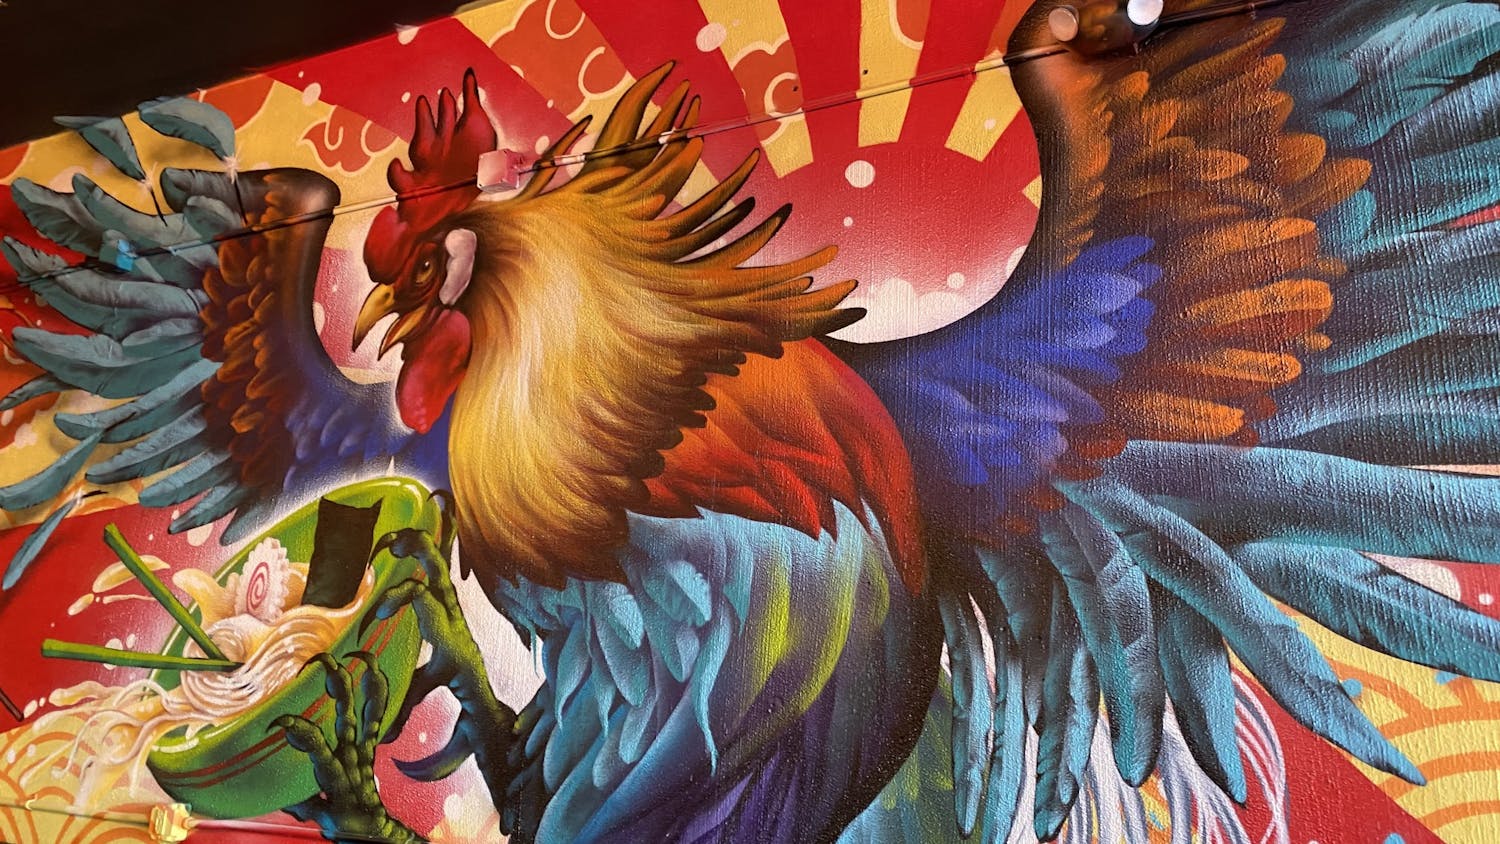 A mural within Boku Kitchen and Saloon, a new Pan-Asian restaurant in the Vista. The art and atmosphere within Boku are inspired by the graffiti art at the Wynwood Walls, an urban graffiti art museum in Miami, FL.